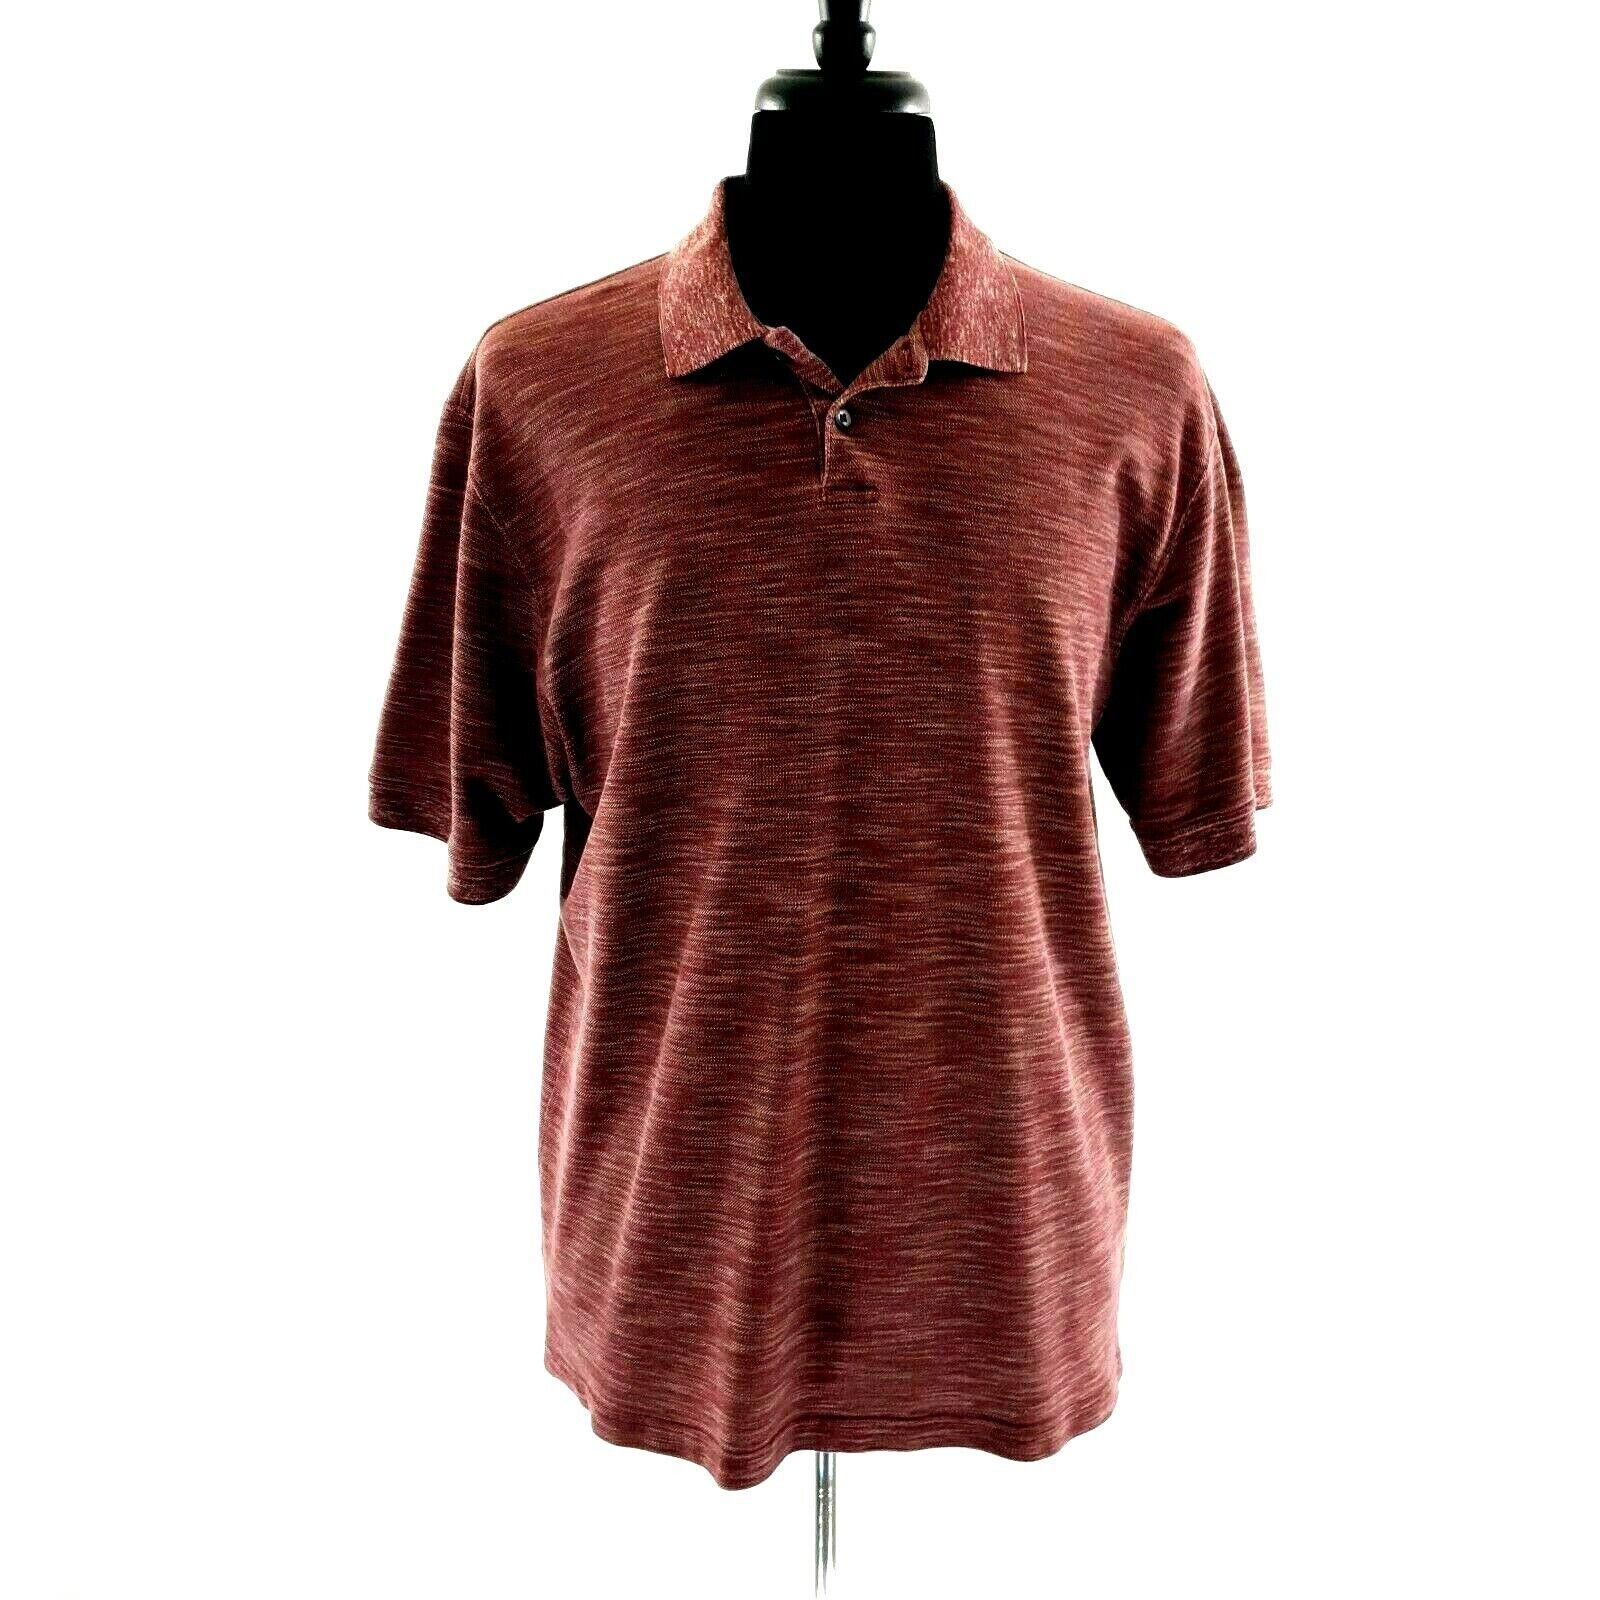 Primary image for Van Heusen Mens XL Short Sleeve Shirt Polo Athletic Golf Maroon Brown Heather